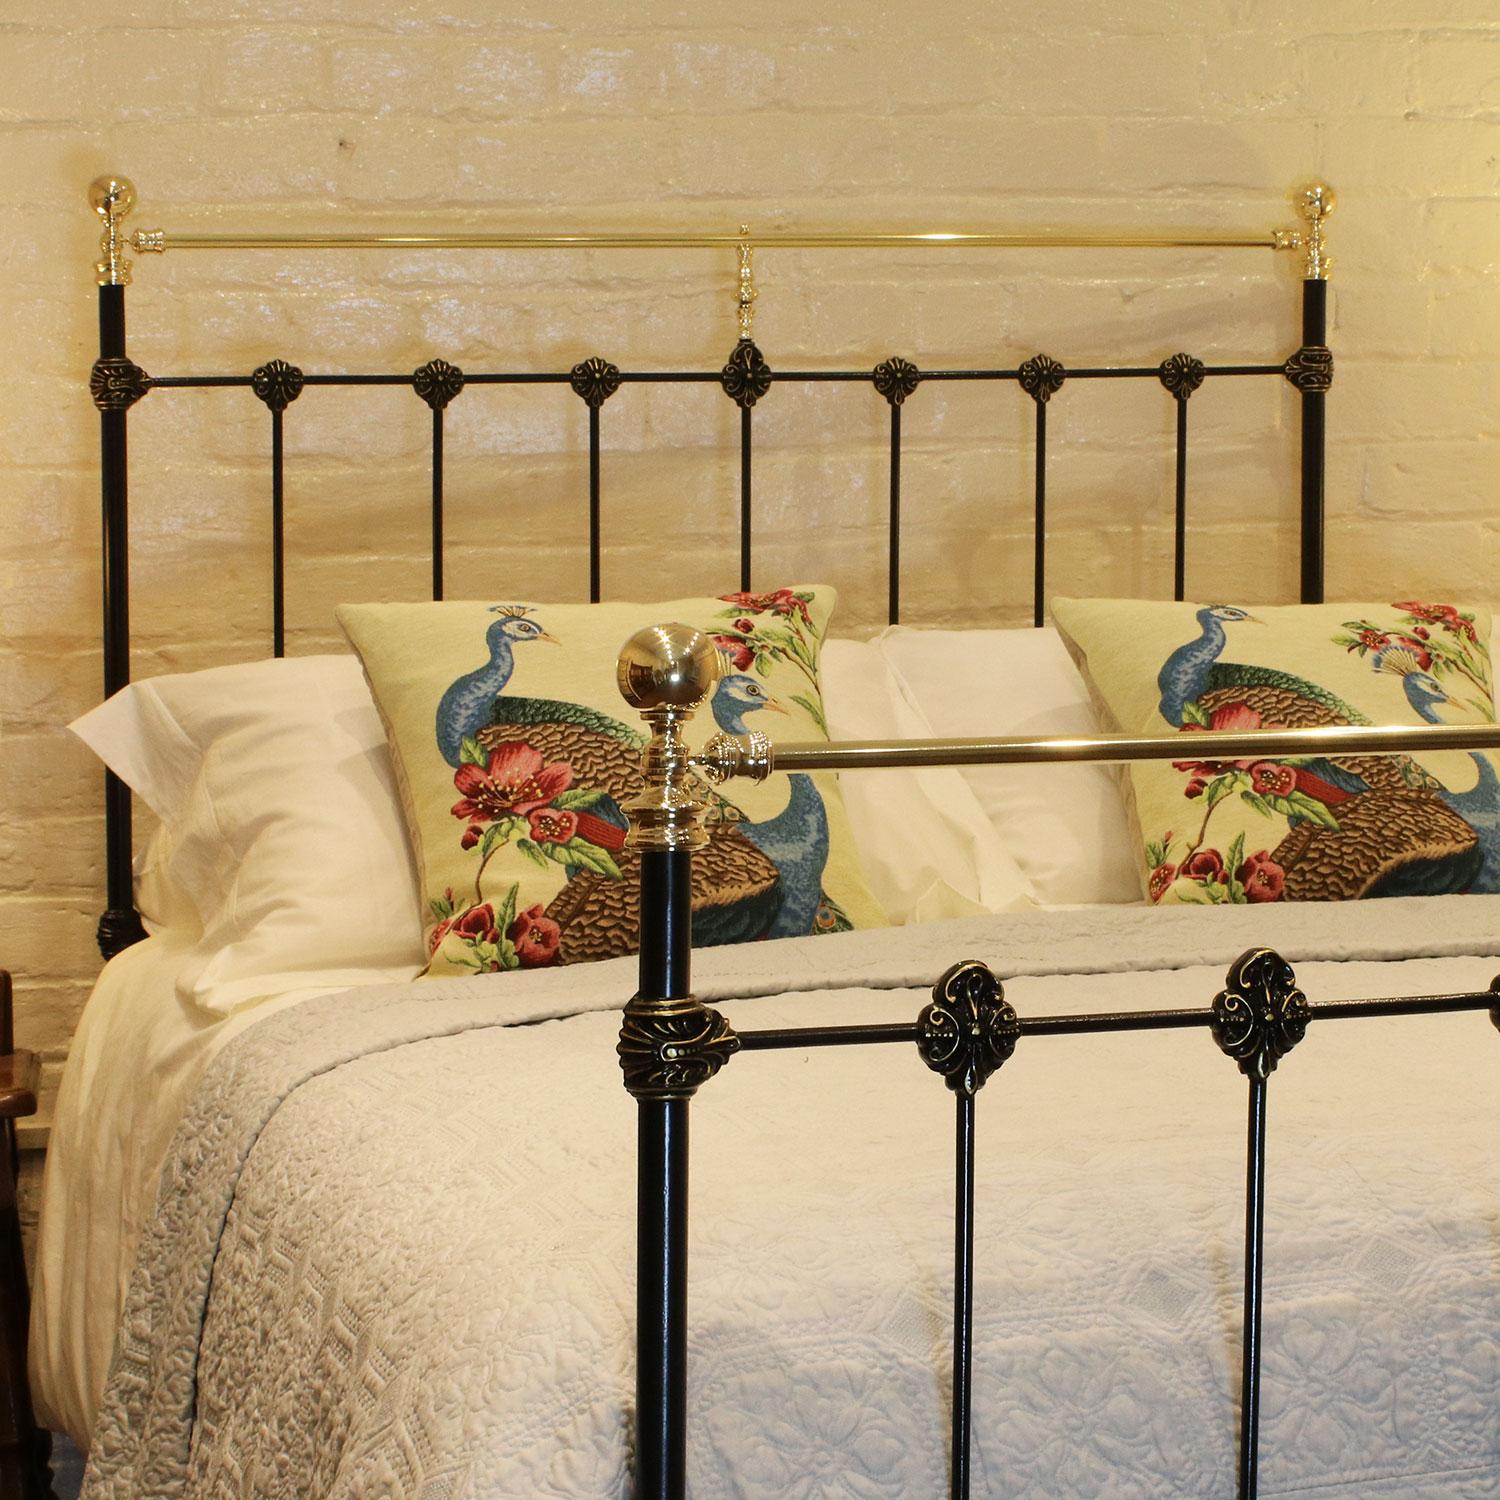 Brass and cast iron bed in black with decorative moldings. Beautifully painted gold lining to emphasize the rich details within the castings.

This bed accepts a double size base and mattress set (4ft 6